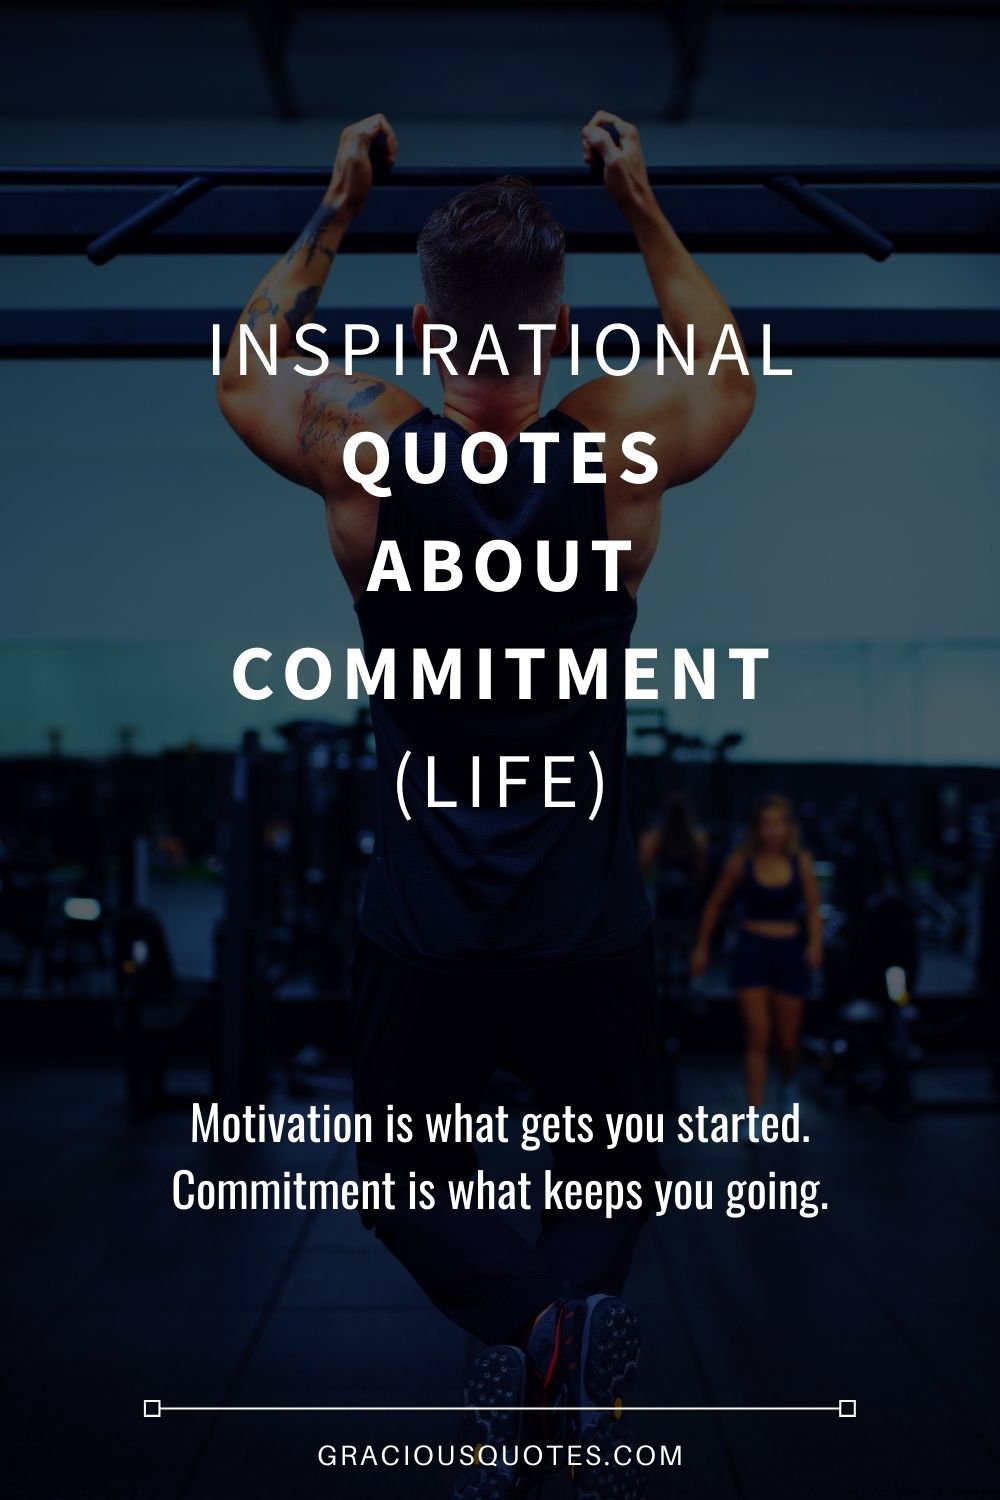 Inspirational Quotes About Commitment (LIFE) - Gracious Quotes